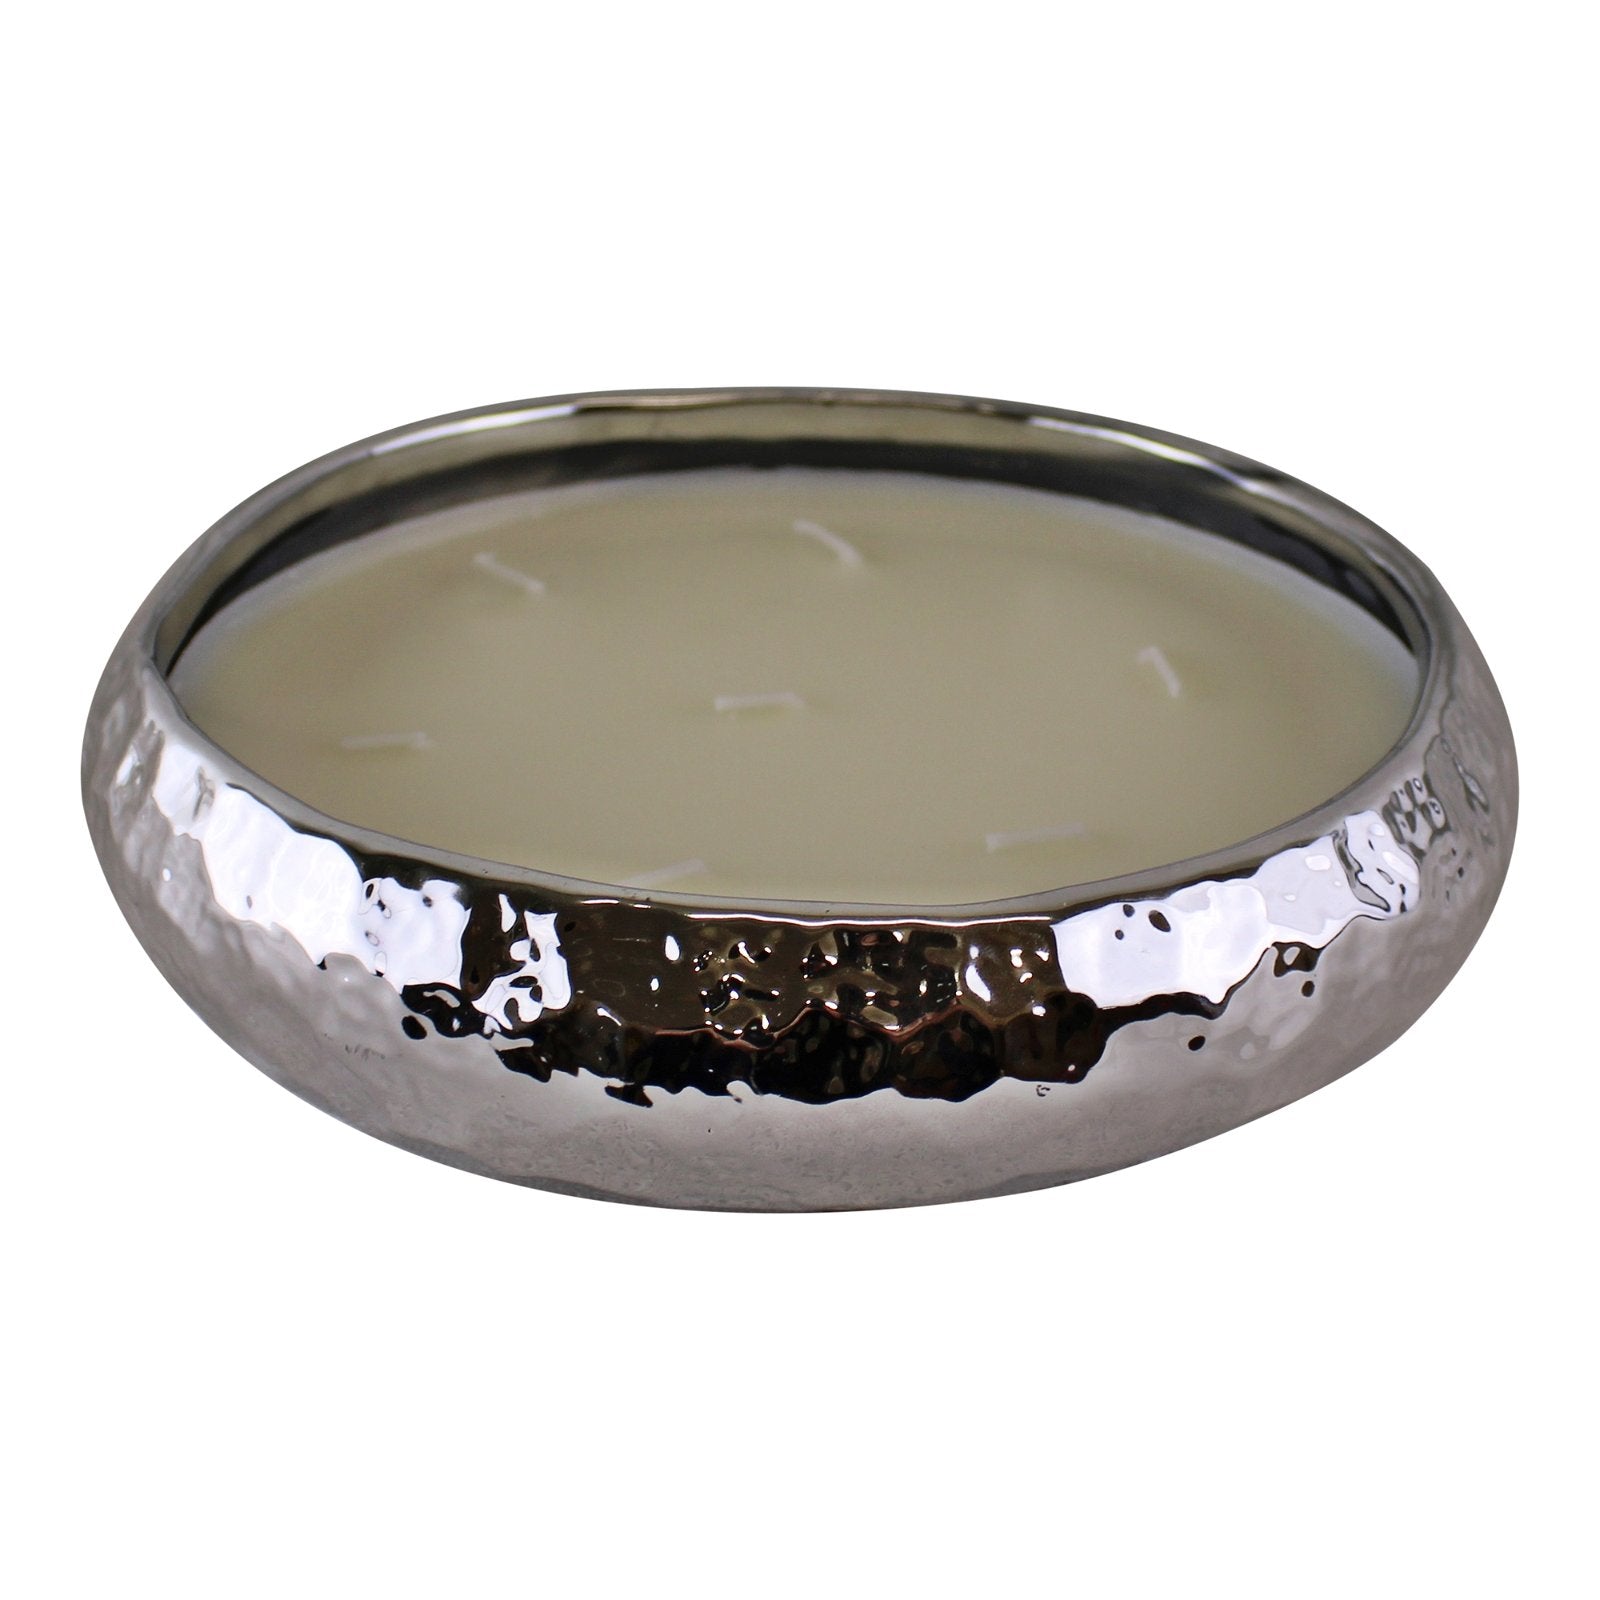 Silver Ceramic Bowl With 7 Wick Sandalwood Fragranced Candle